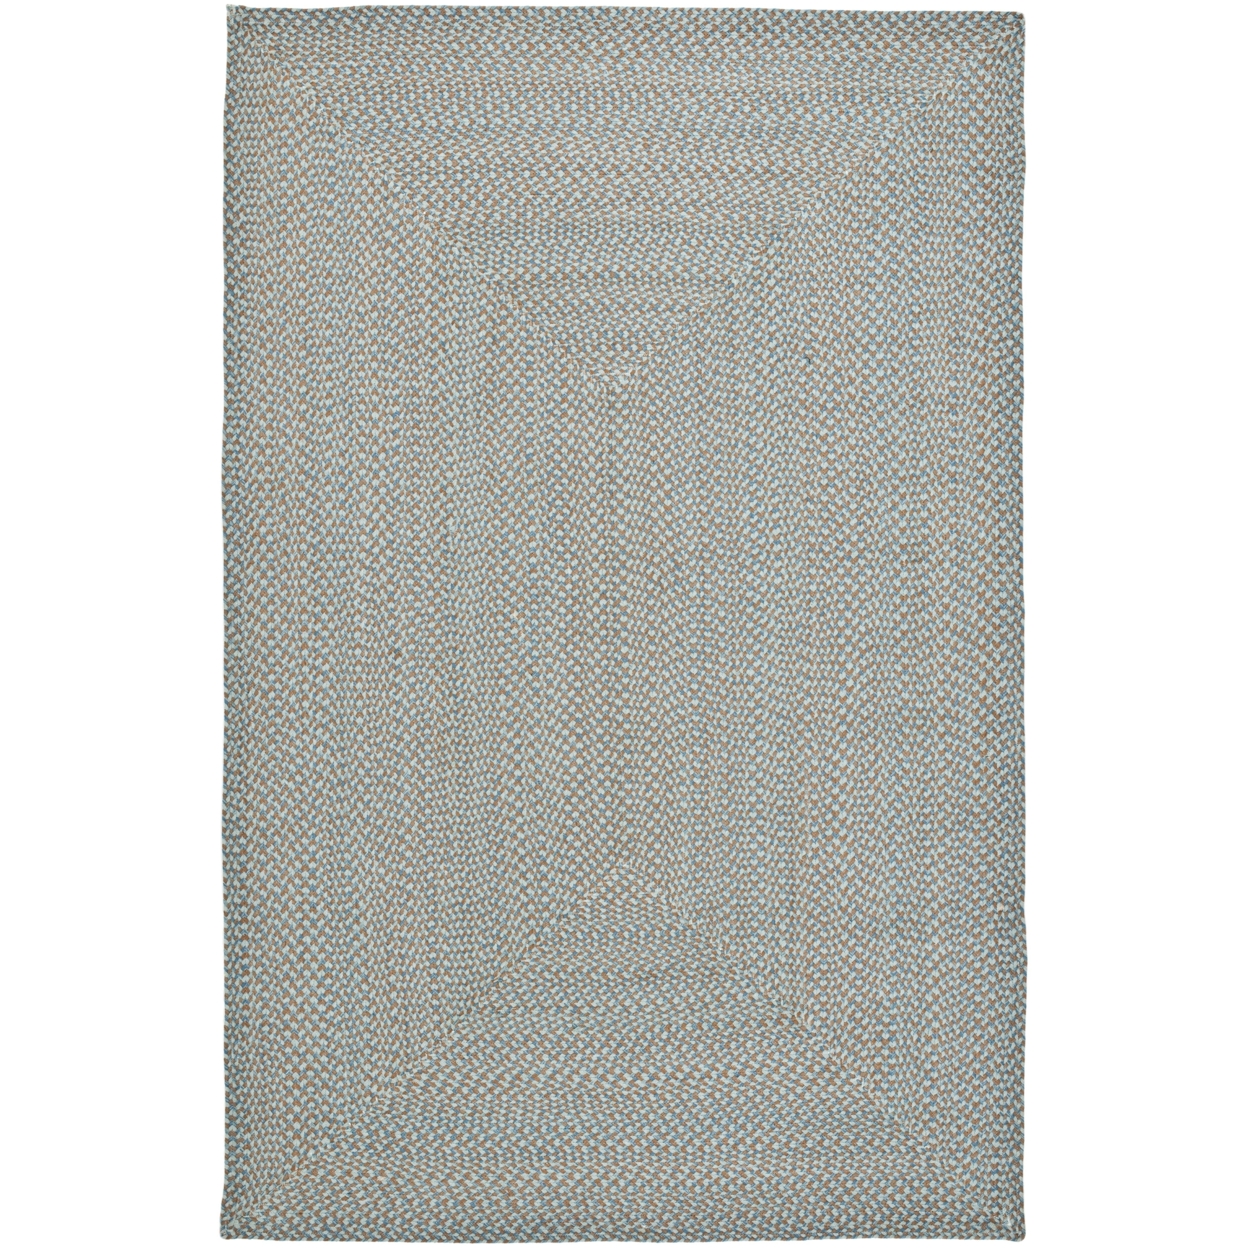 SAFAVIEH Braided Collection BRD170A Handwoven Multi Rug - 3' X 5' Oval